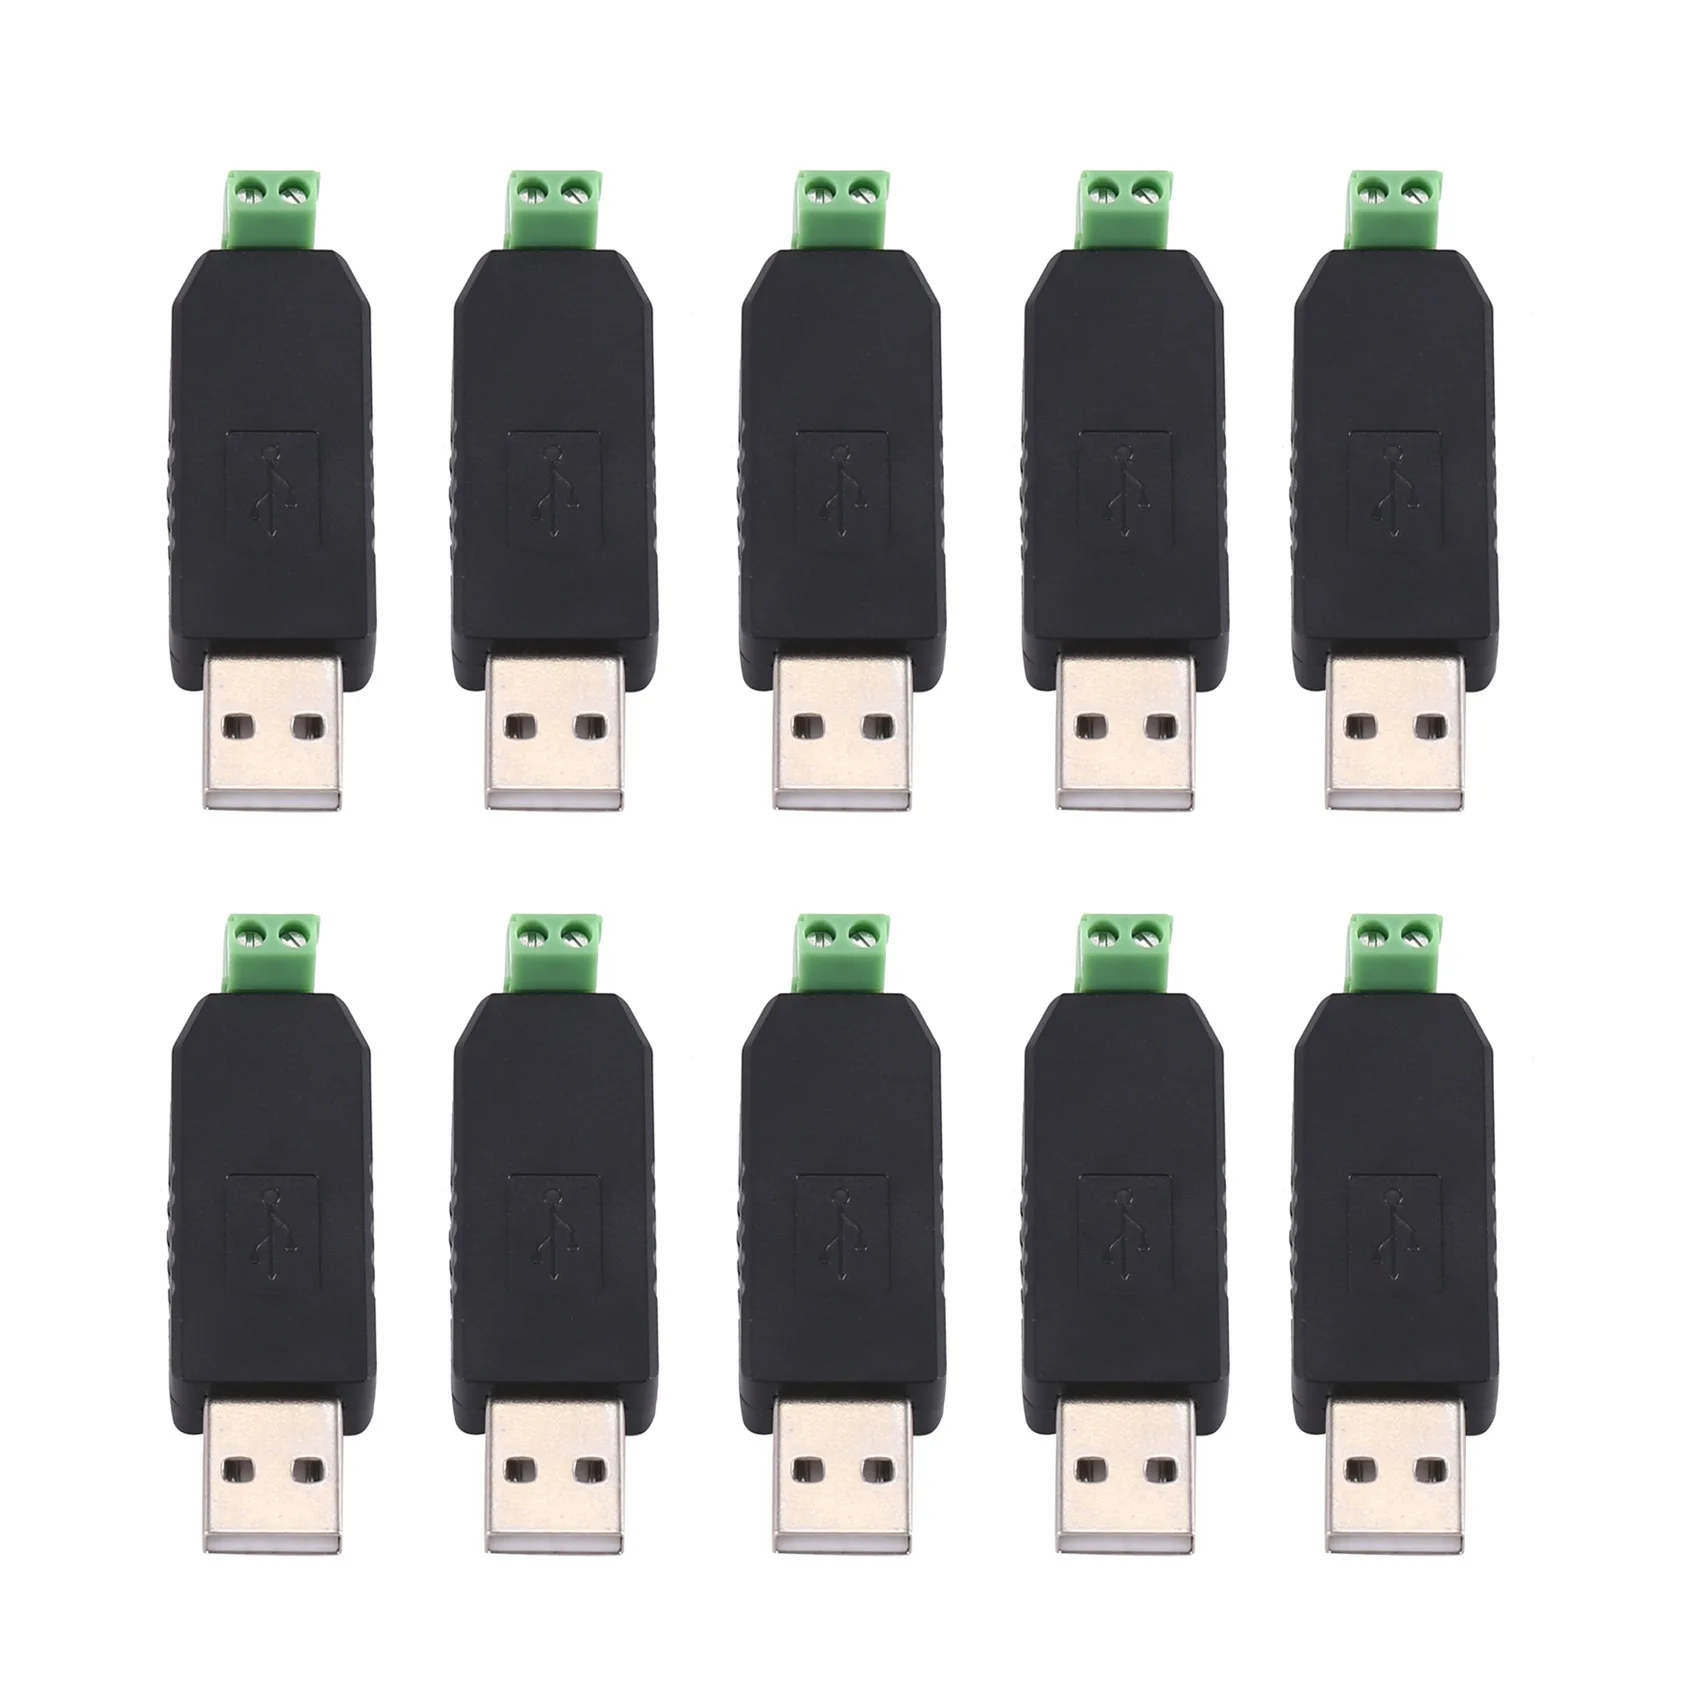 

10 Pcs USB to RS485 485 Converter Adapter Support for Win7 XP Vista Linux -Mac OS WinCE5.0